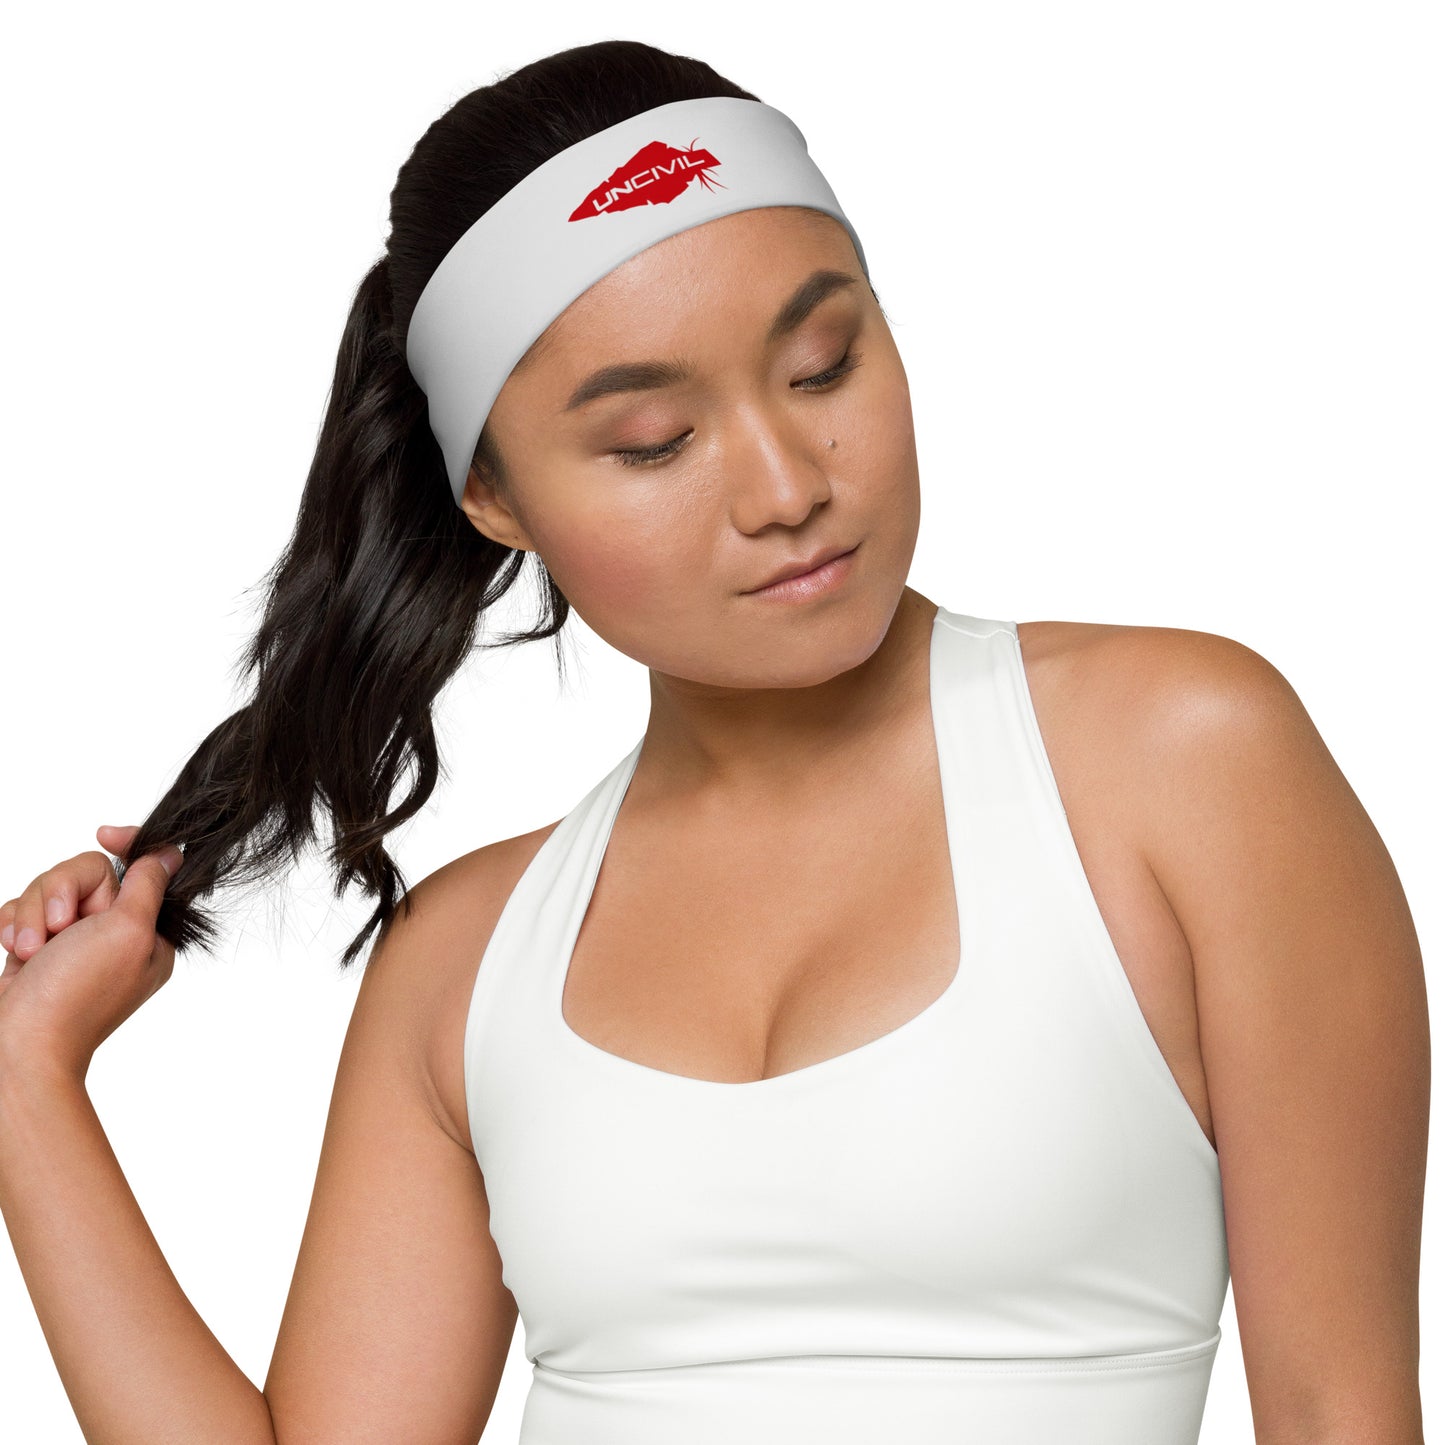 UNCIVIL Grey and Red Headband for men and women. Workout headband.